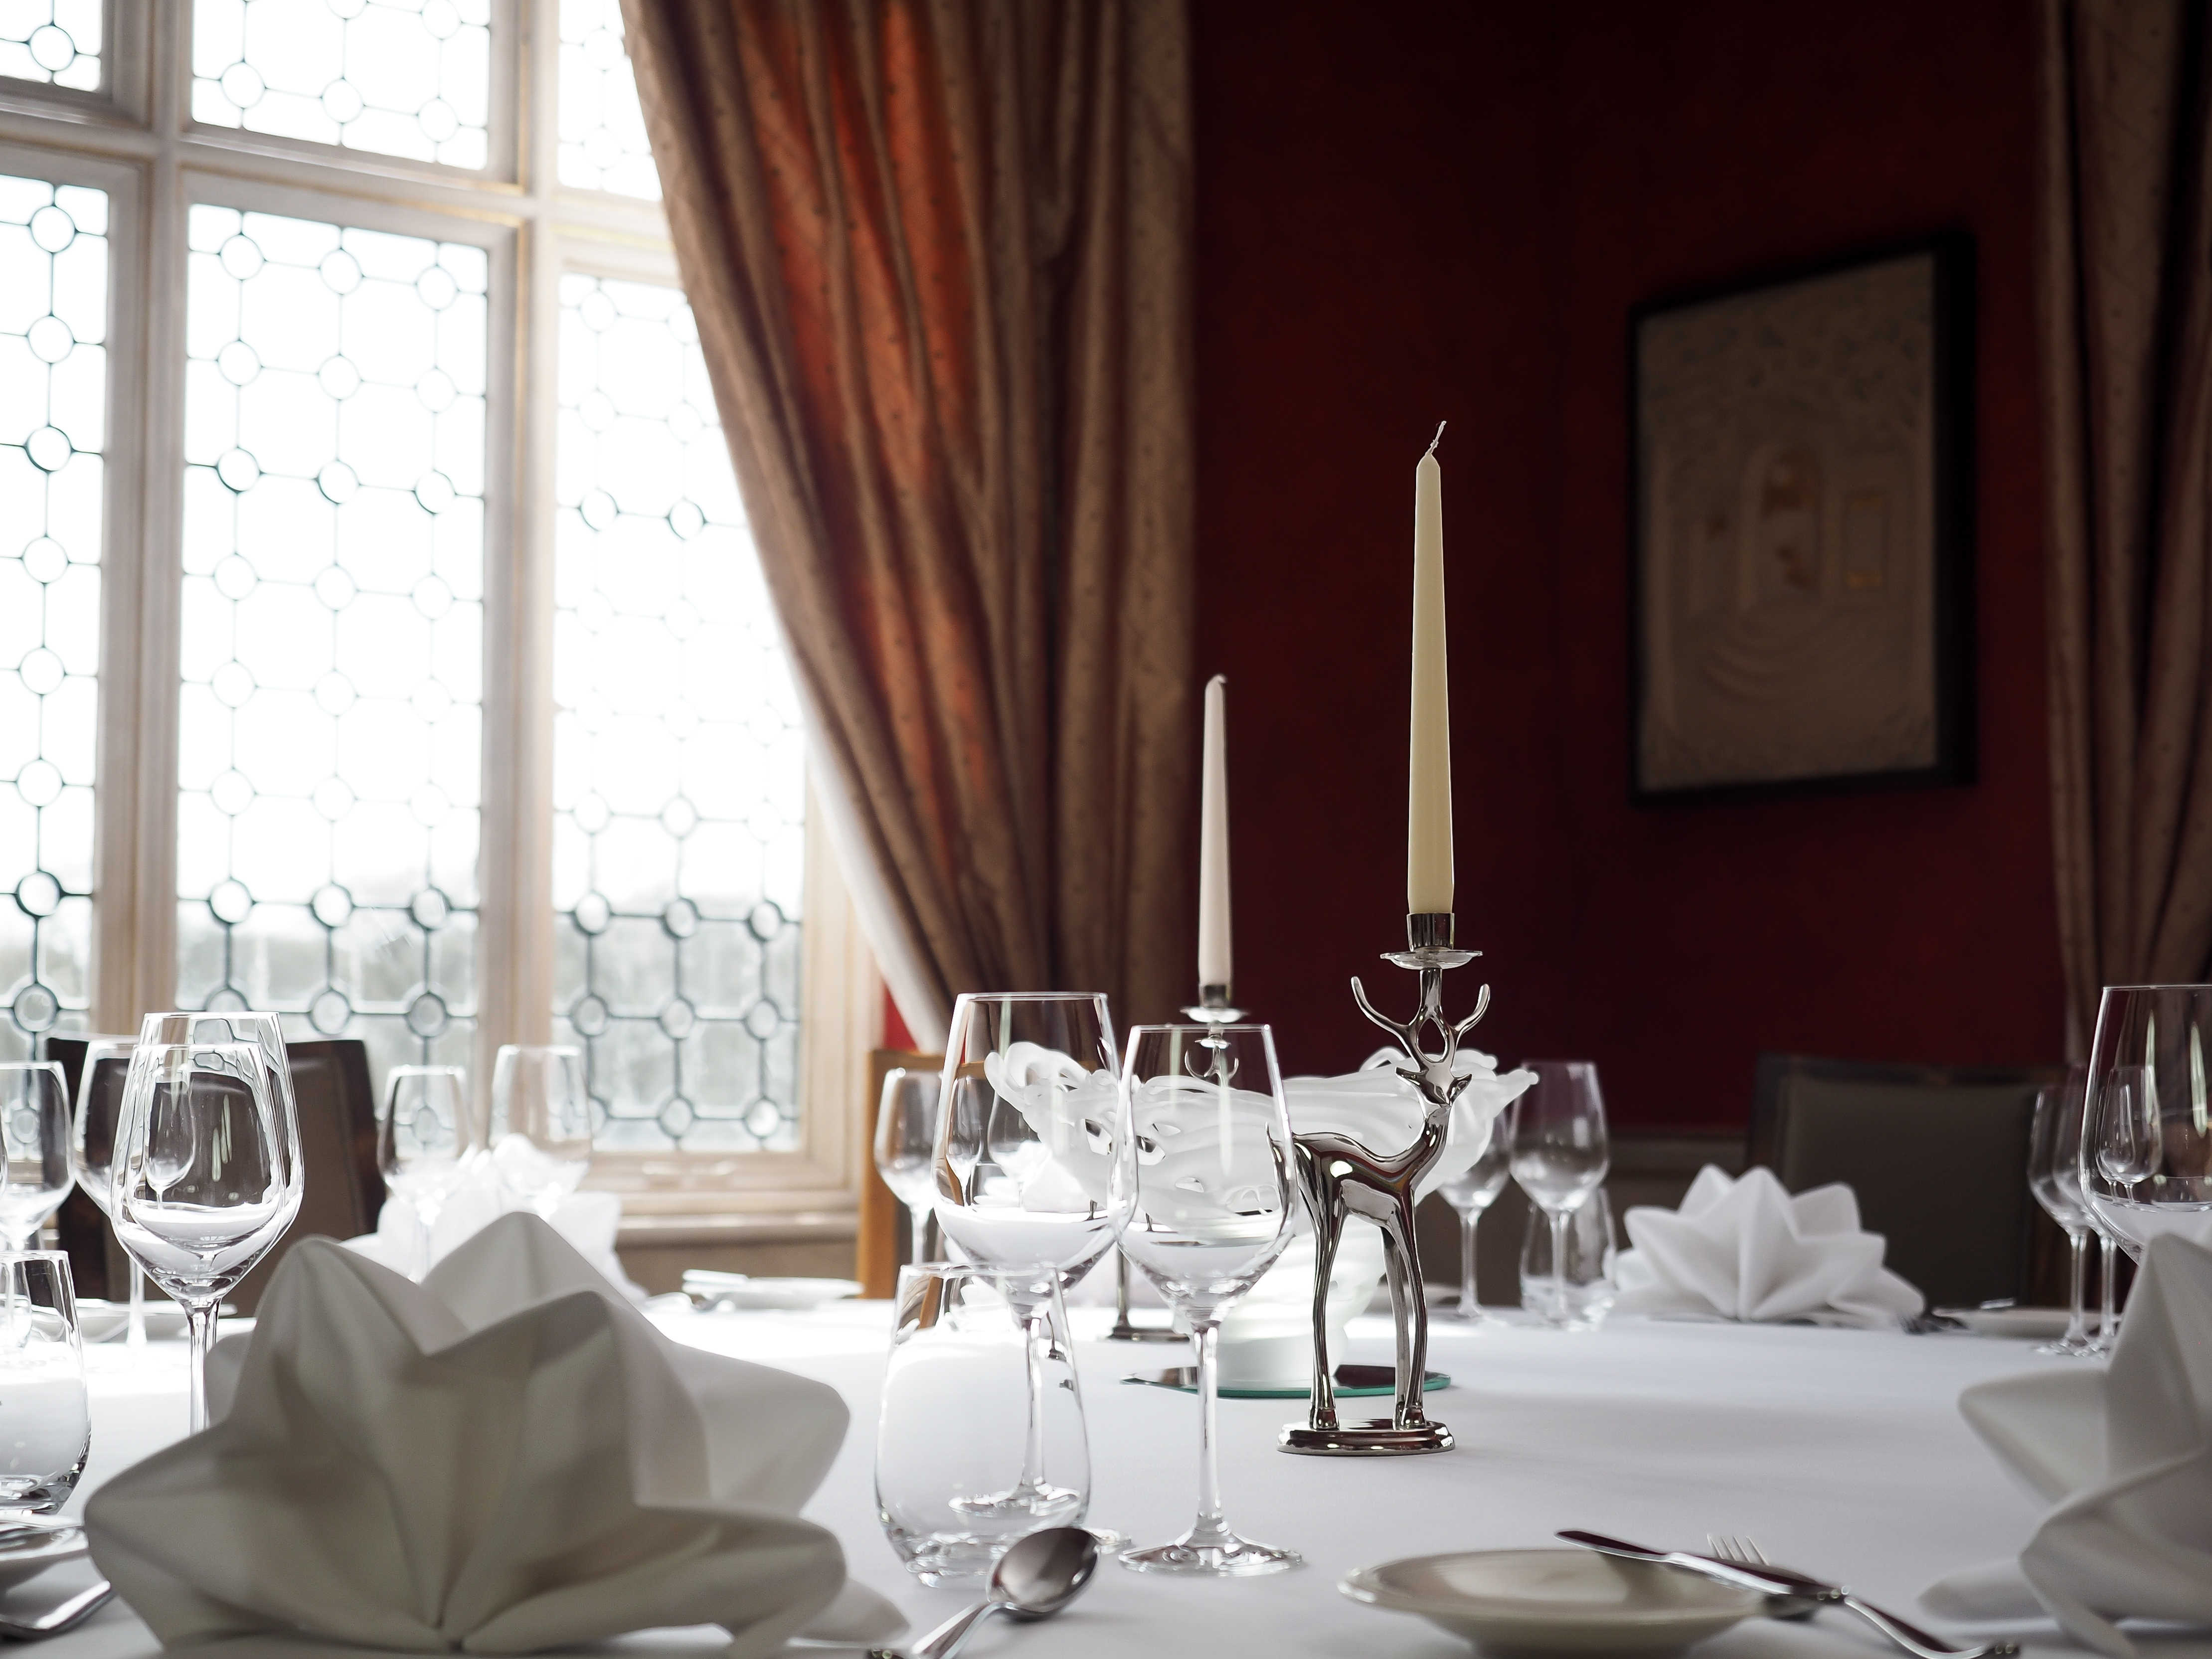 Private dining at Paris House